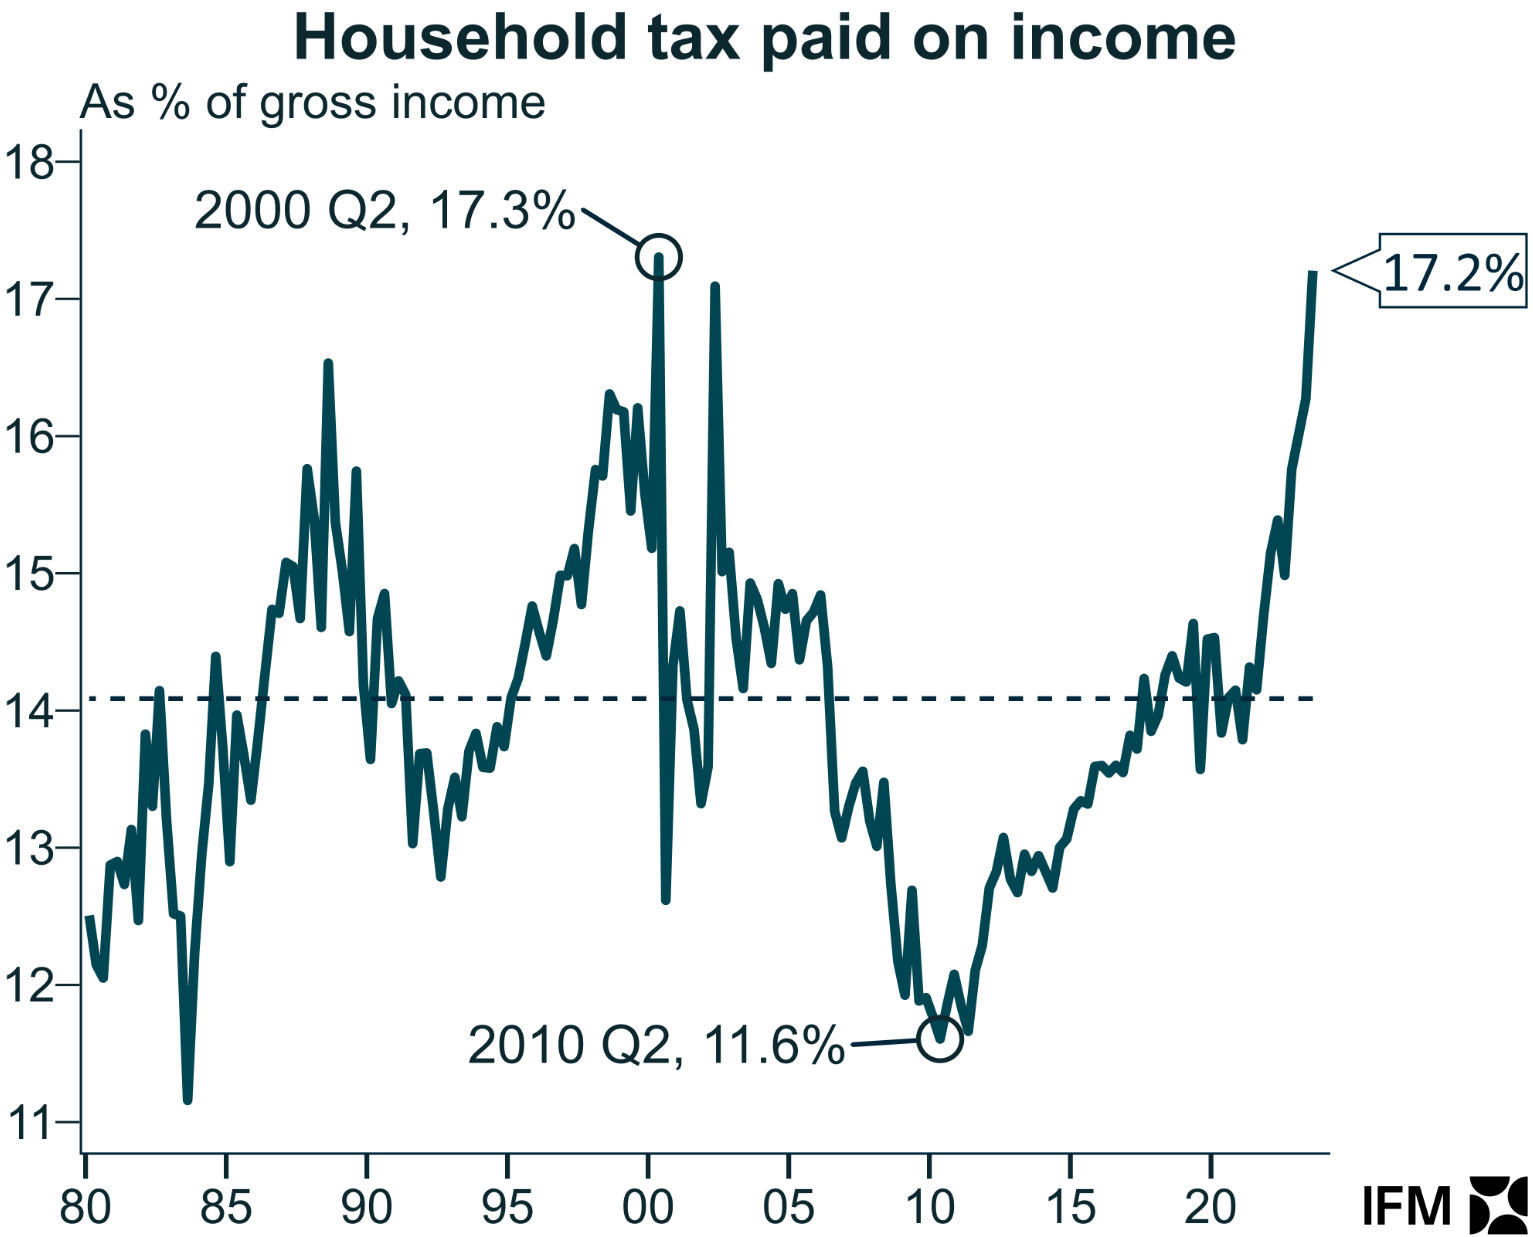 Household income lax share